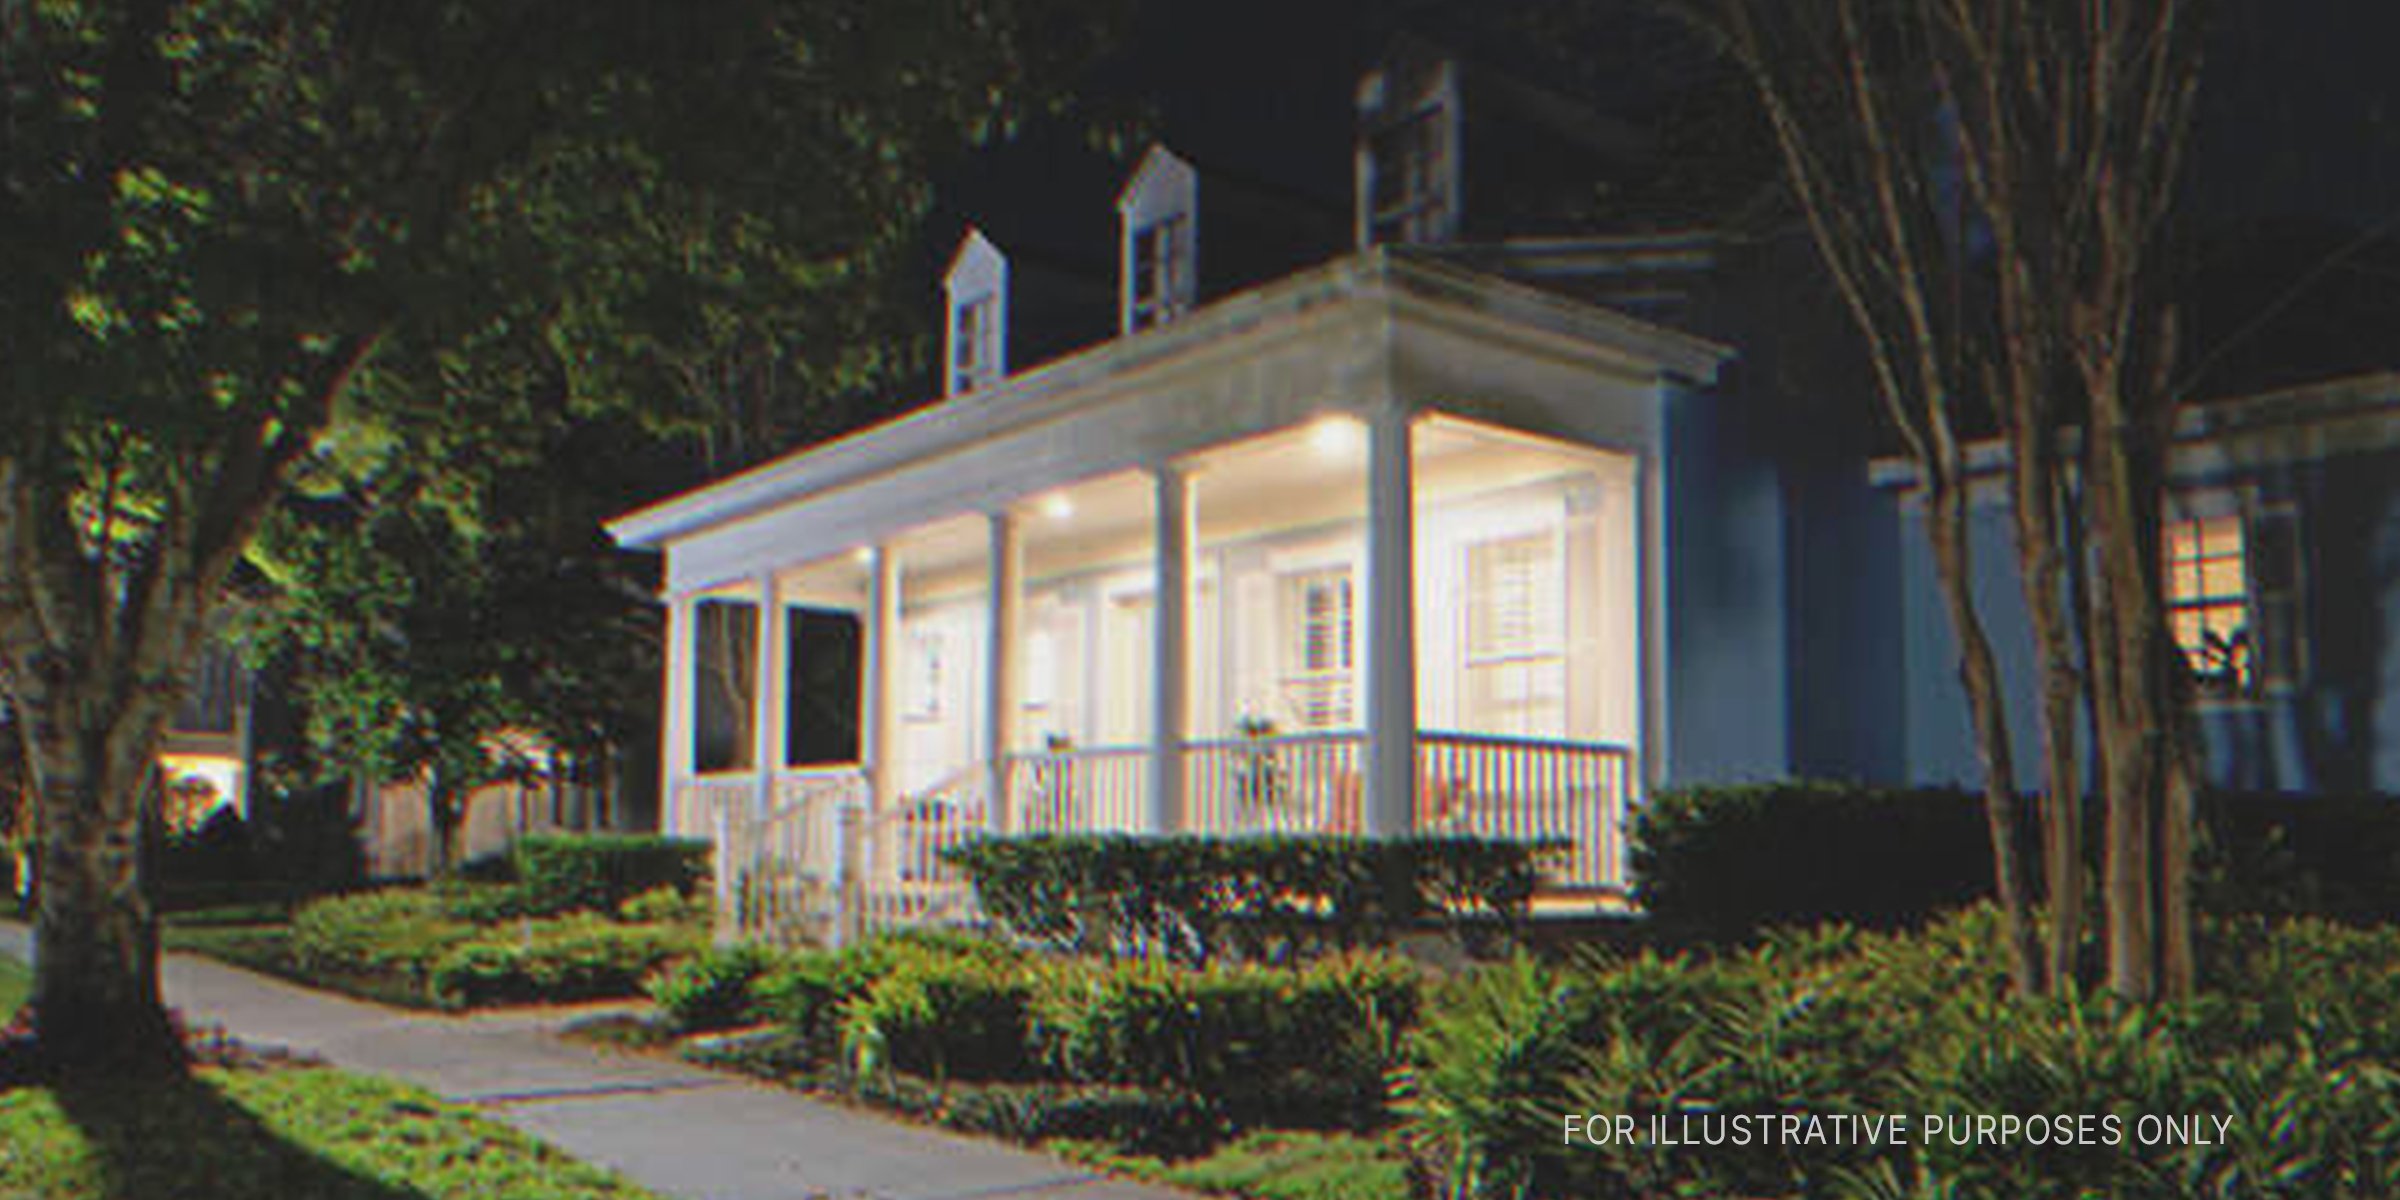 A suburban home with porch lights on | Source: Shutterstock